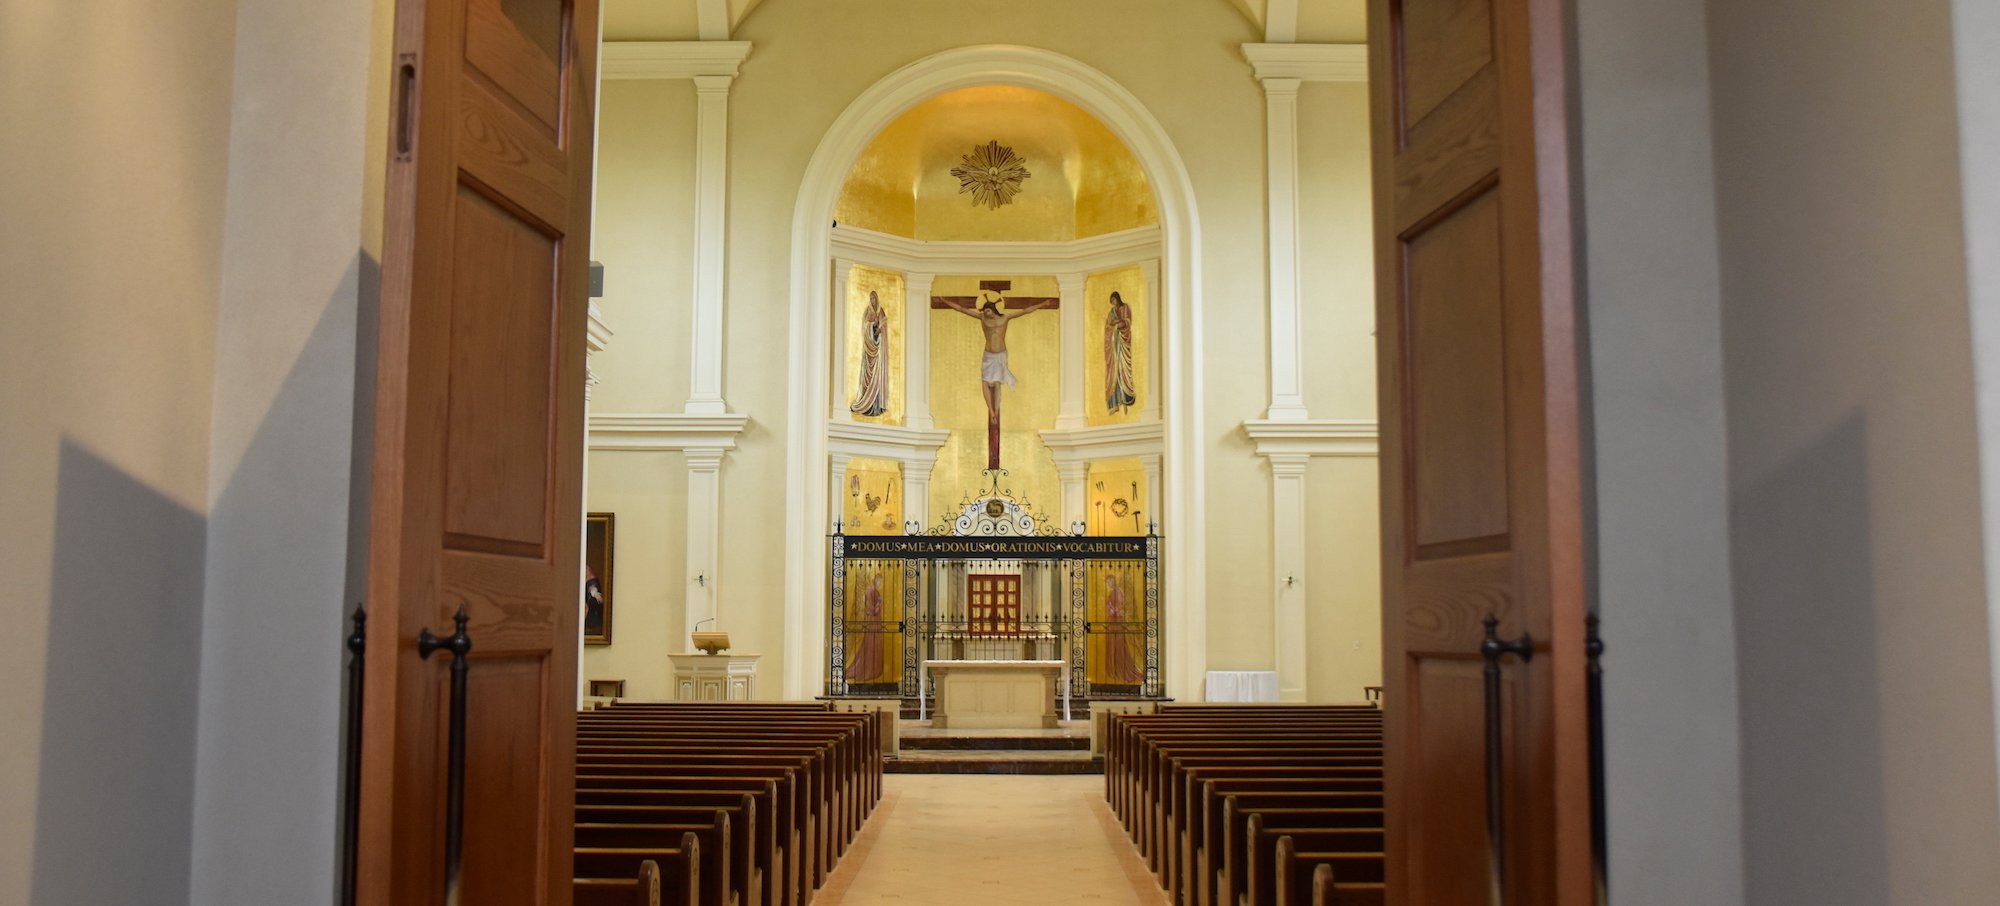 A view of the interior of Holy Family Parish